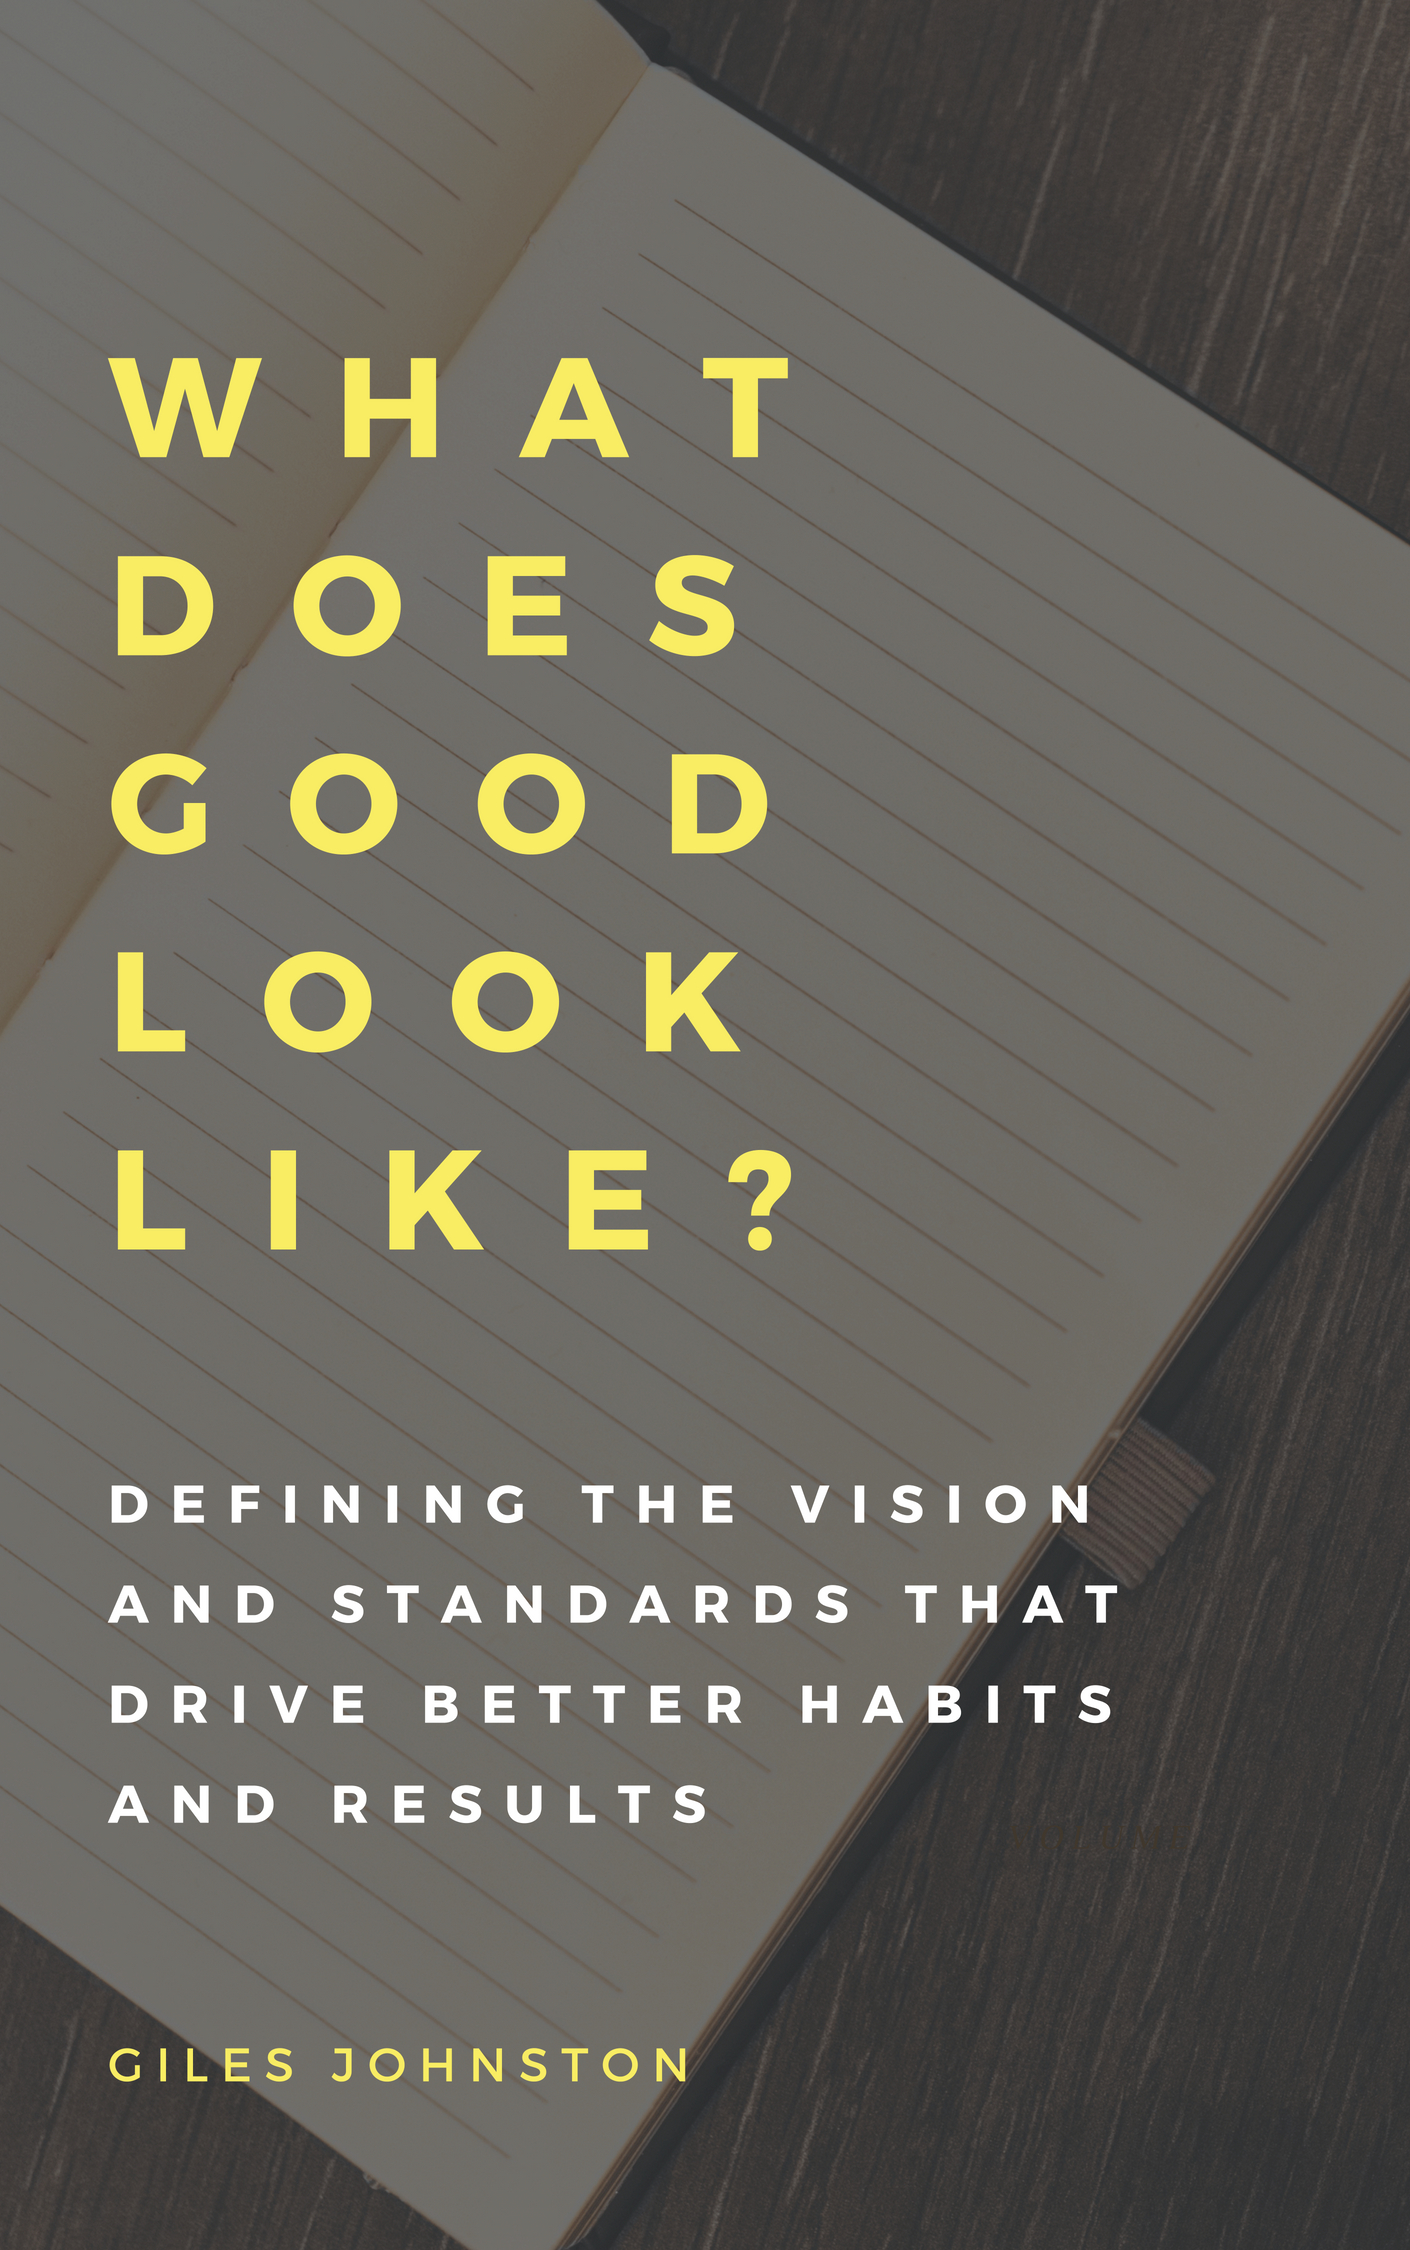 Improve the performance of your business by articulating 'what does good look like?'